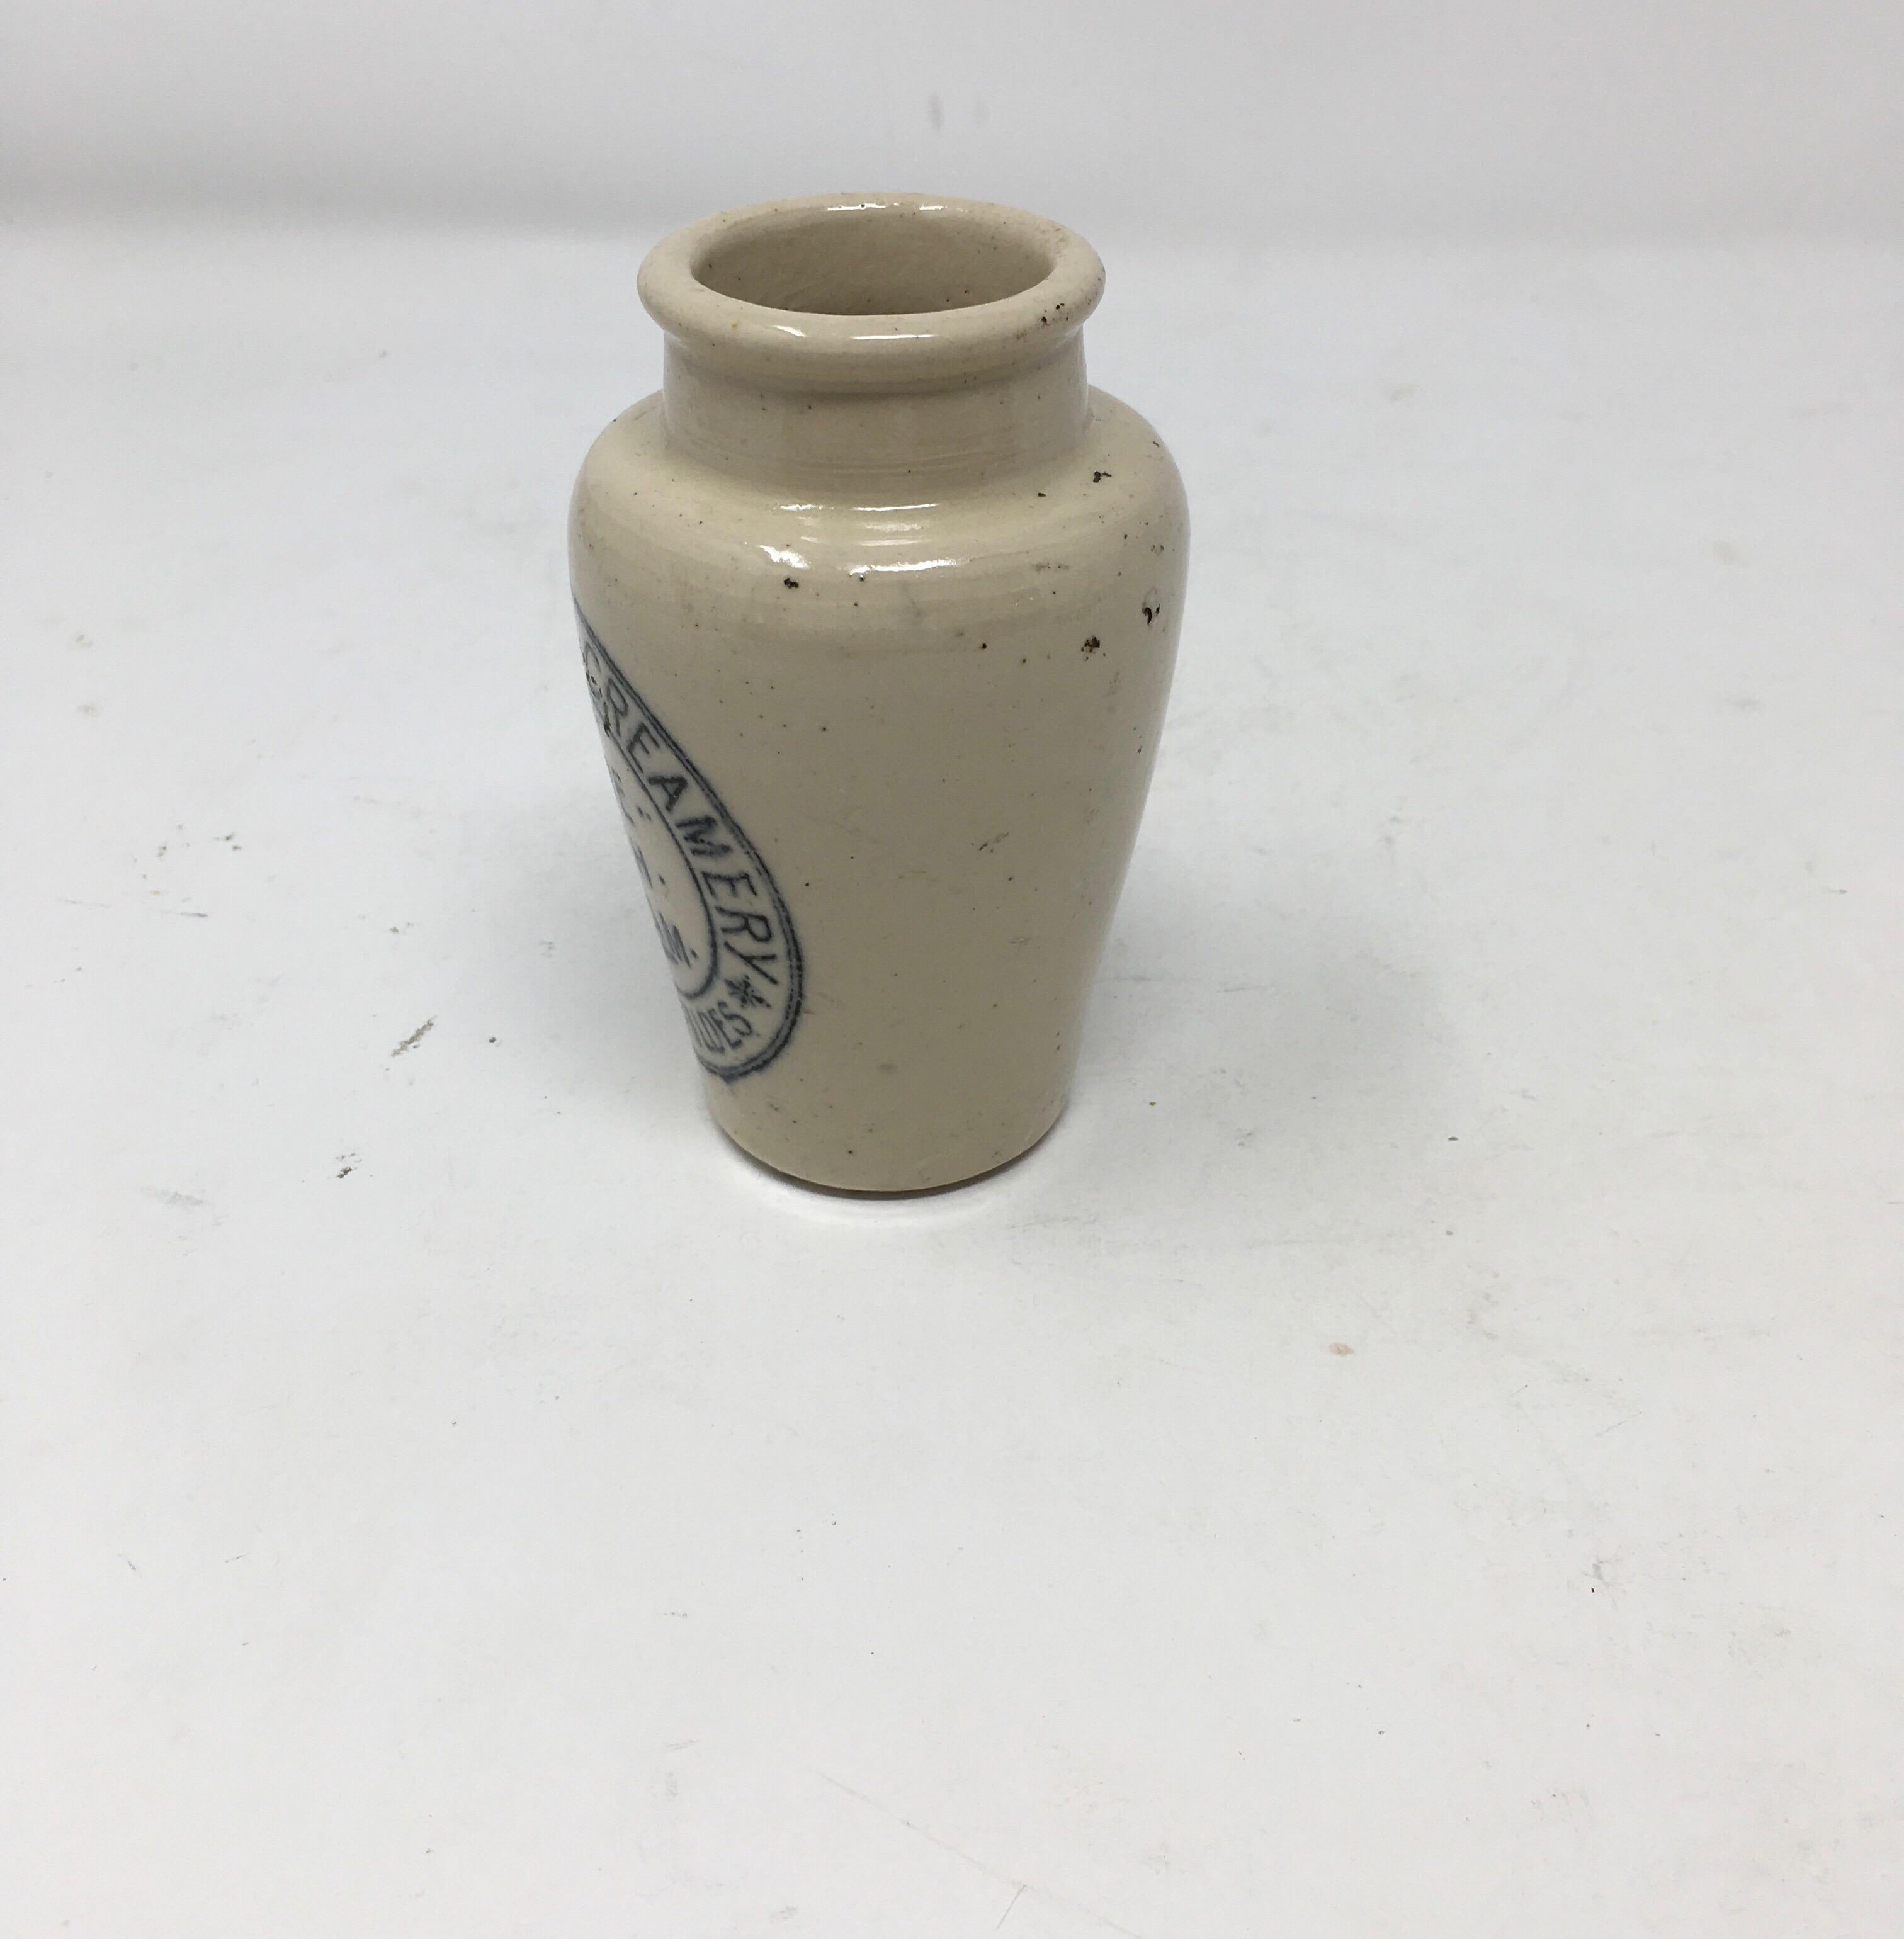 Found in England, this Mobberley creamery pure rich cream – Henry Fildes ironstone advertising pot has beautiful blue transfer typography and is stamped on the bottom Port Dundas Pottery Glasgow.